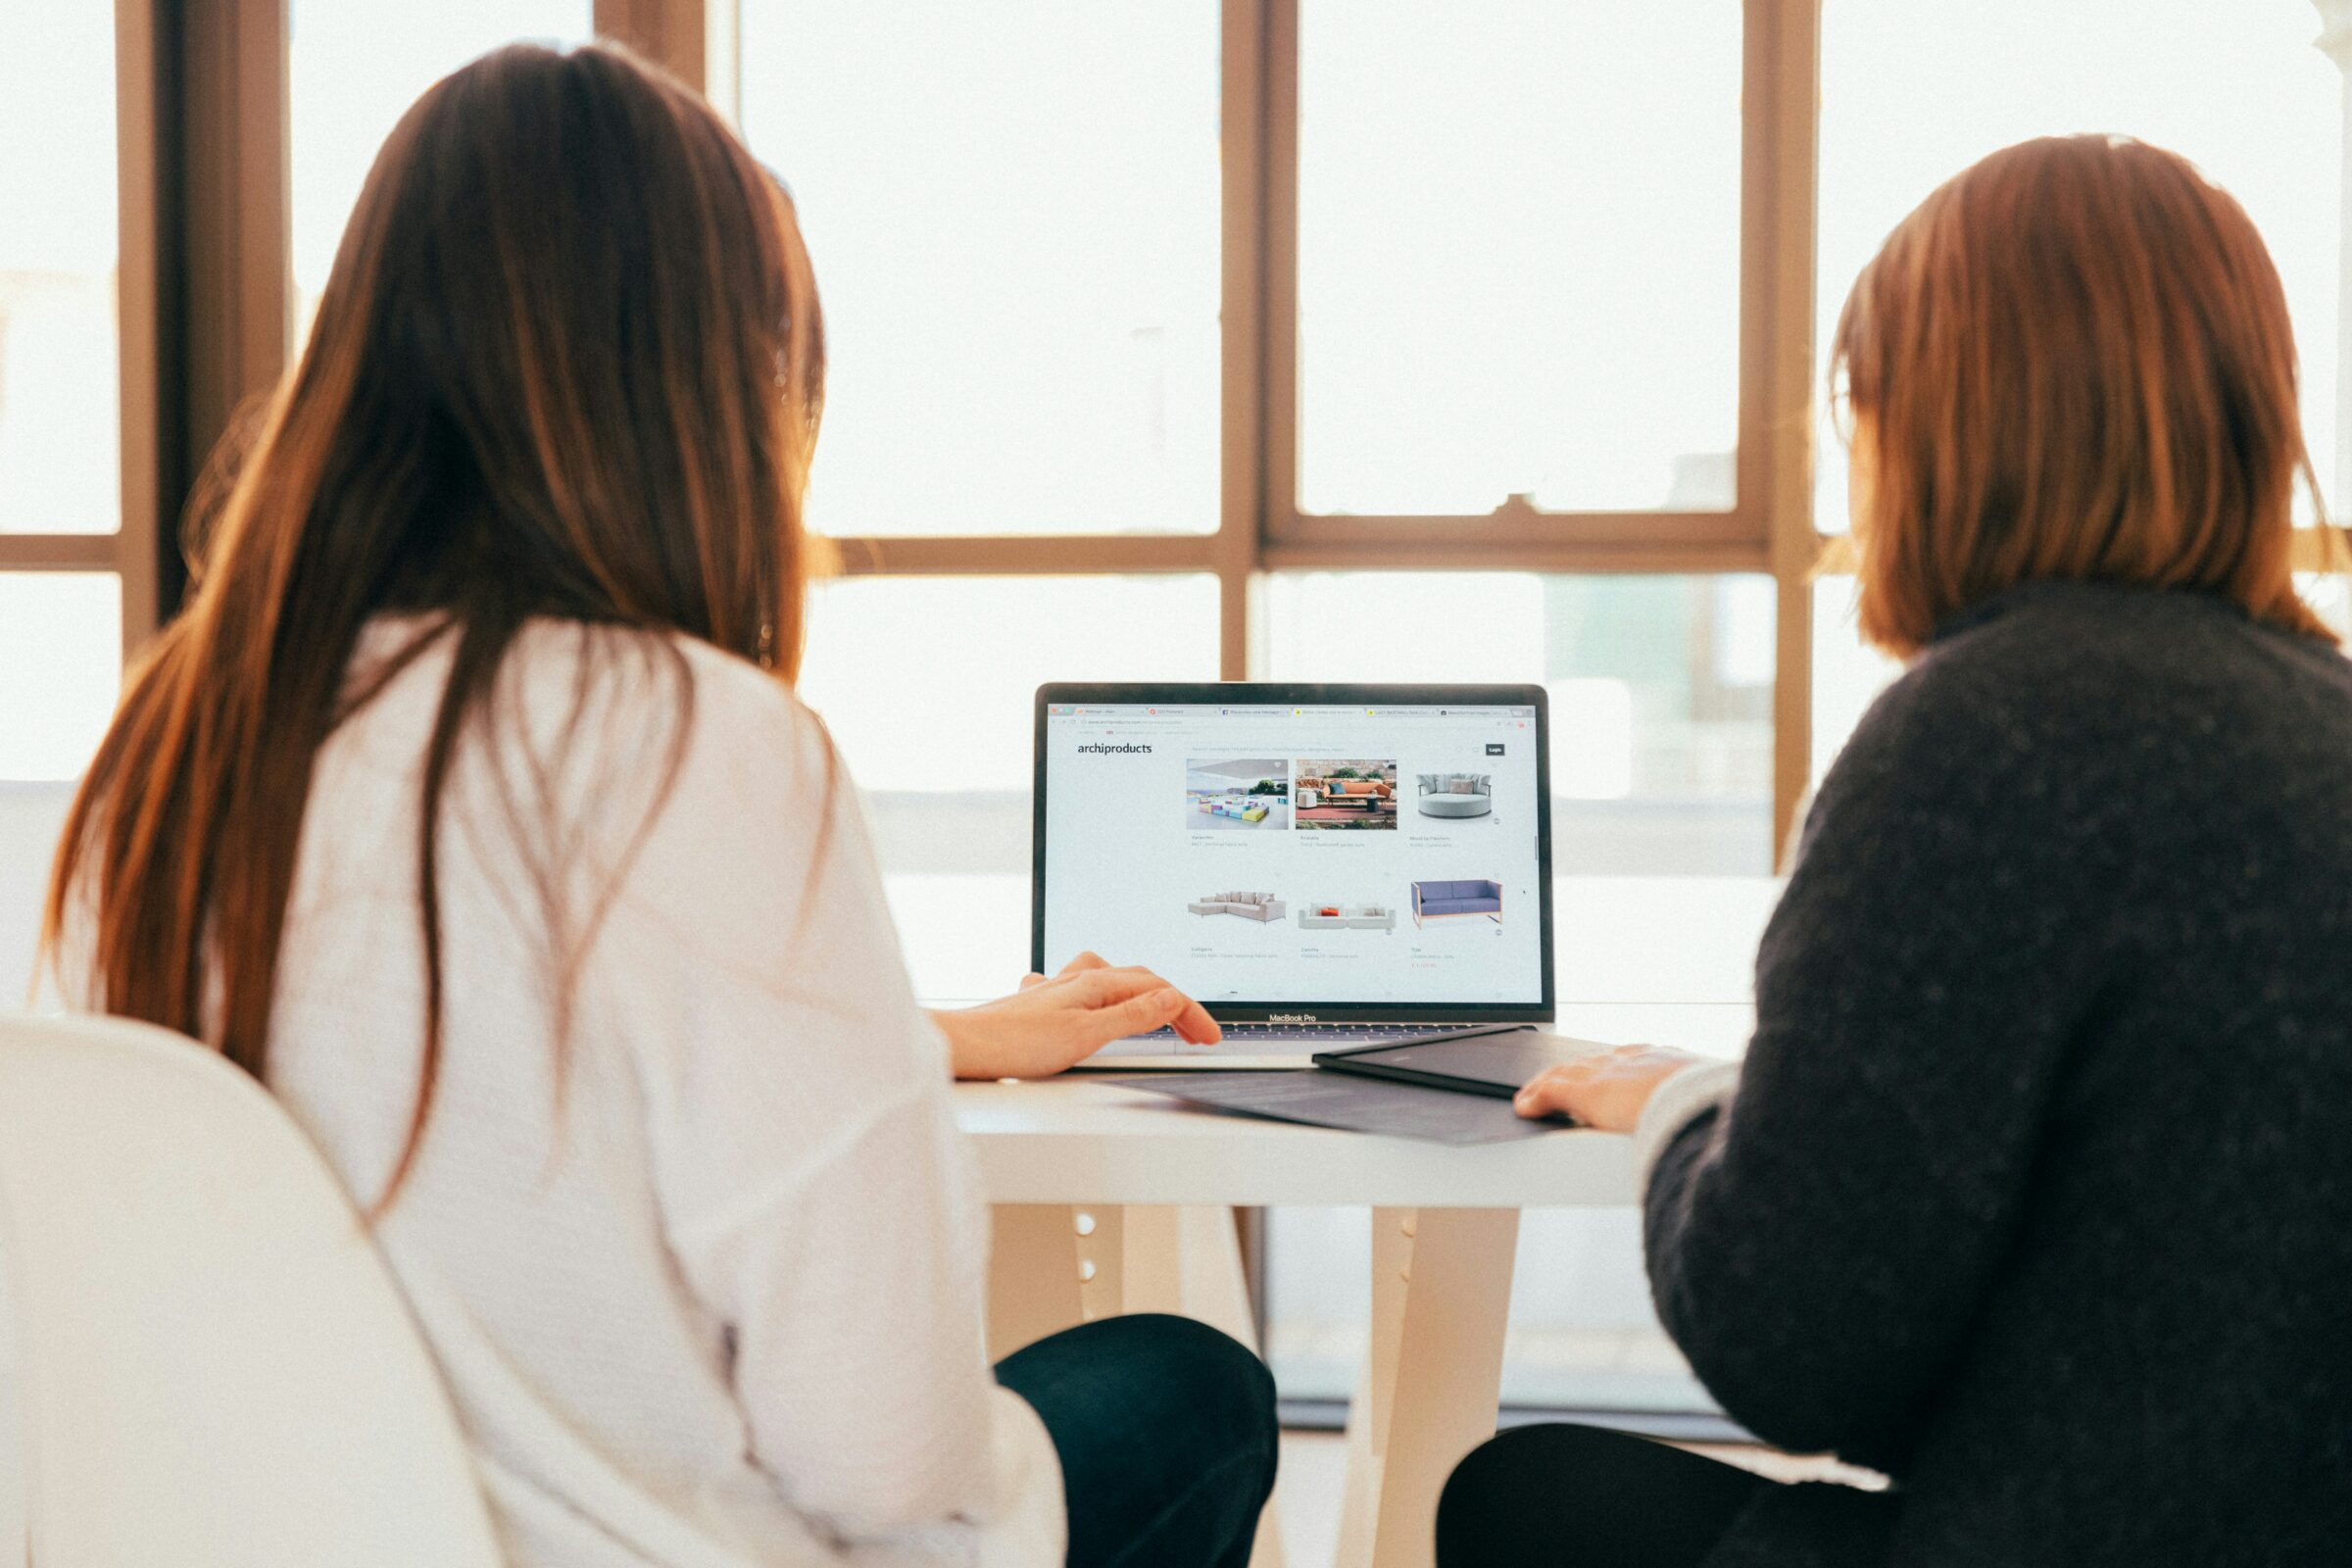 Two women look at email marketing on a laptop.